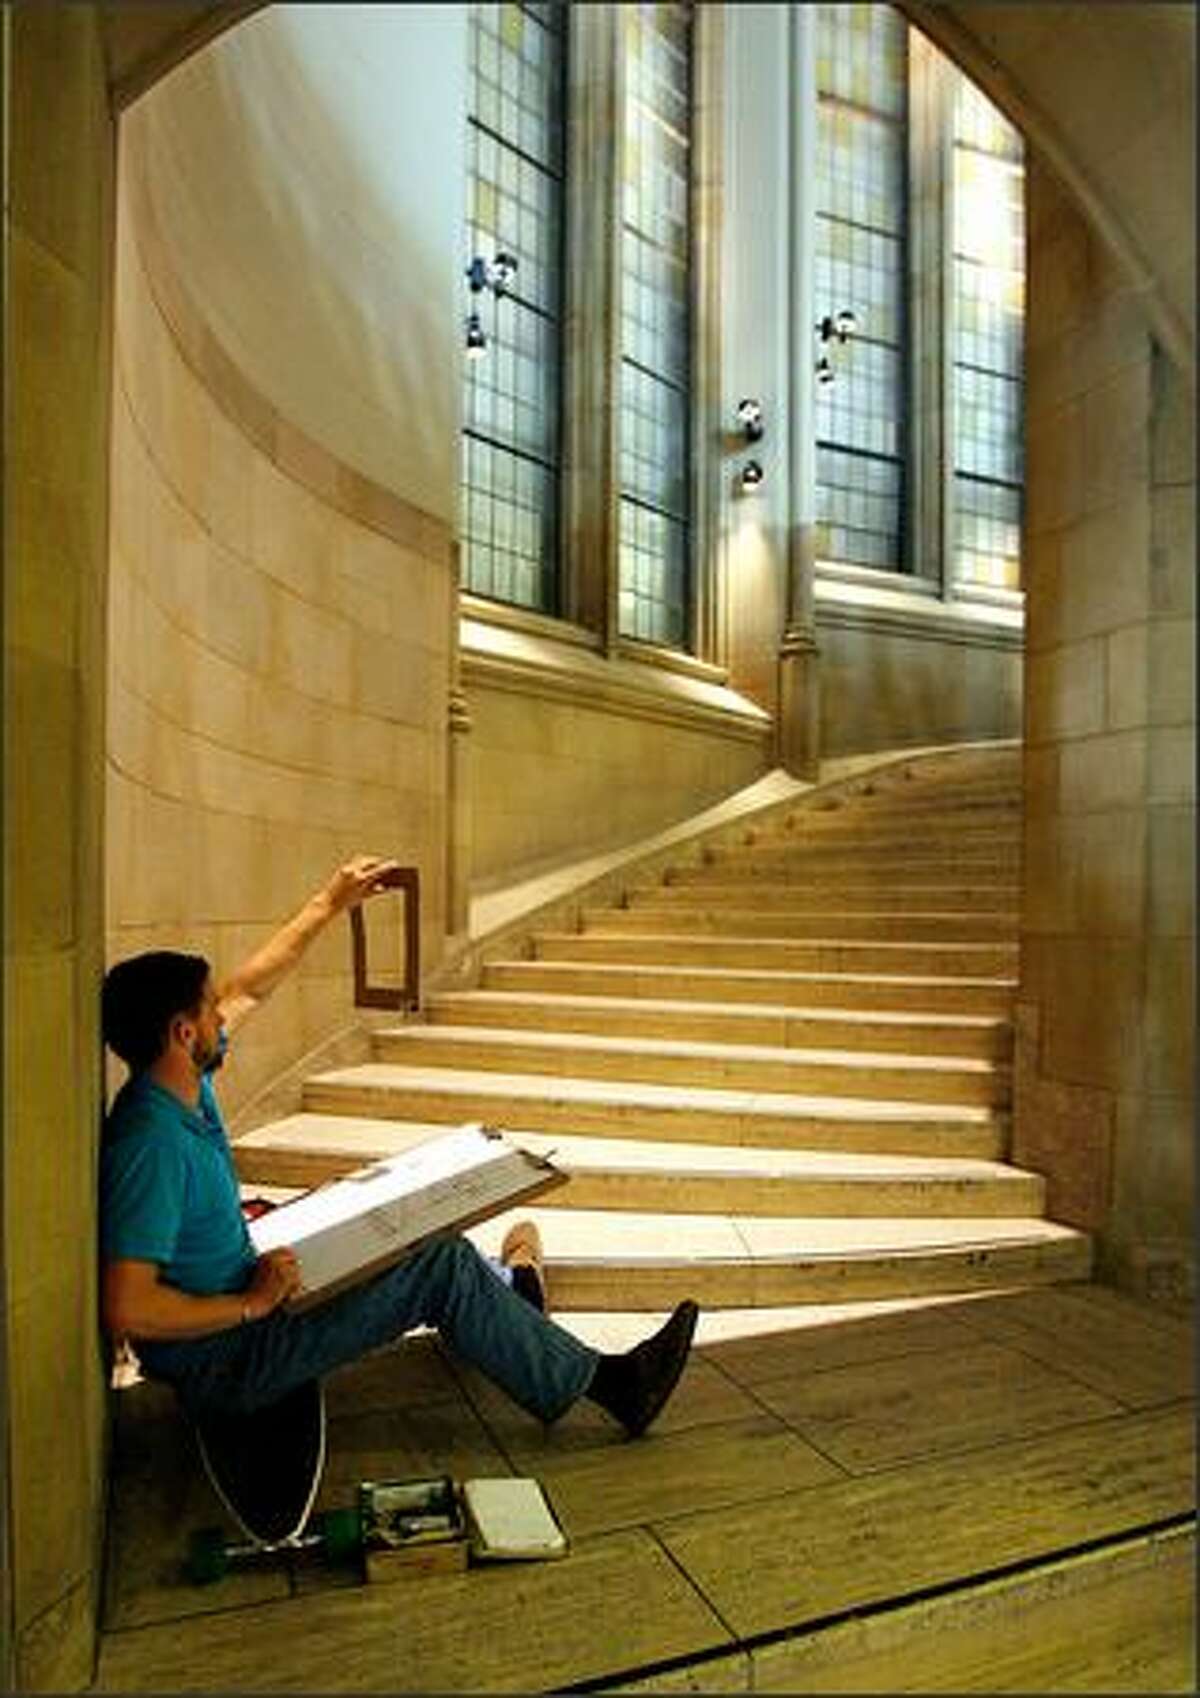 University of Washington student Max Lang holds up a cardboard viewfinder as he sketches the steps and columns of the grand staircase inside the Seattle campus's Suzzallo Library.